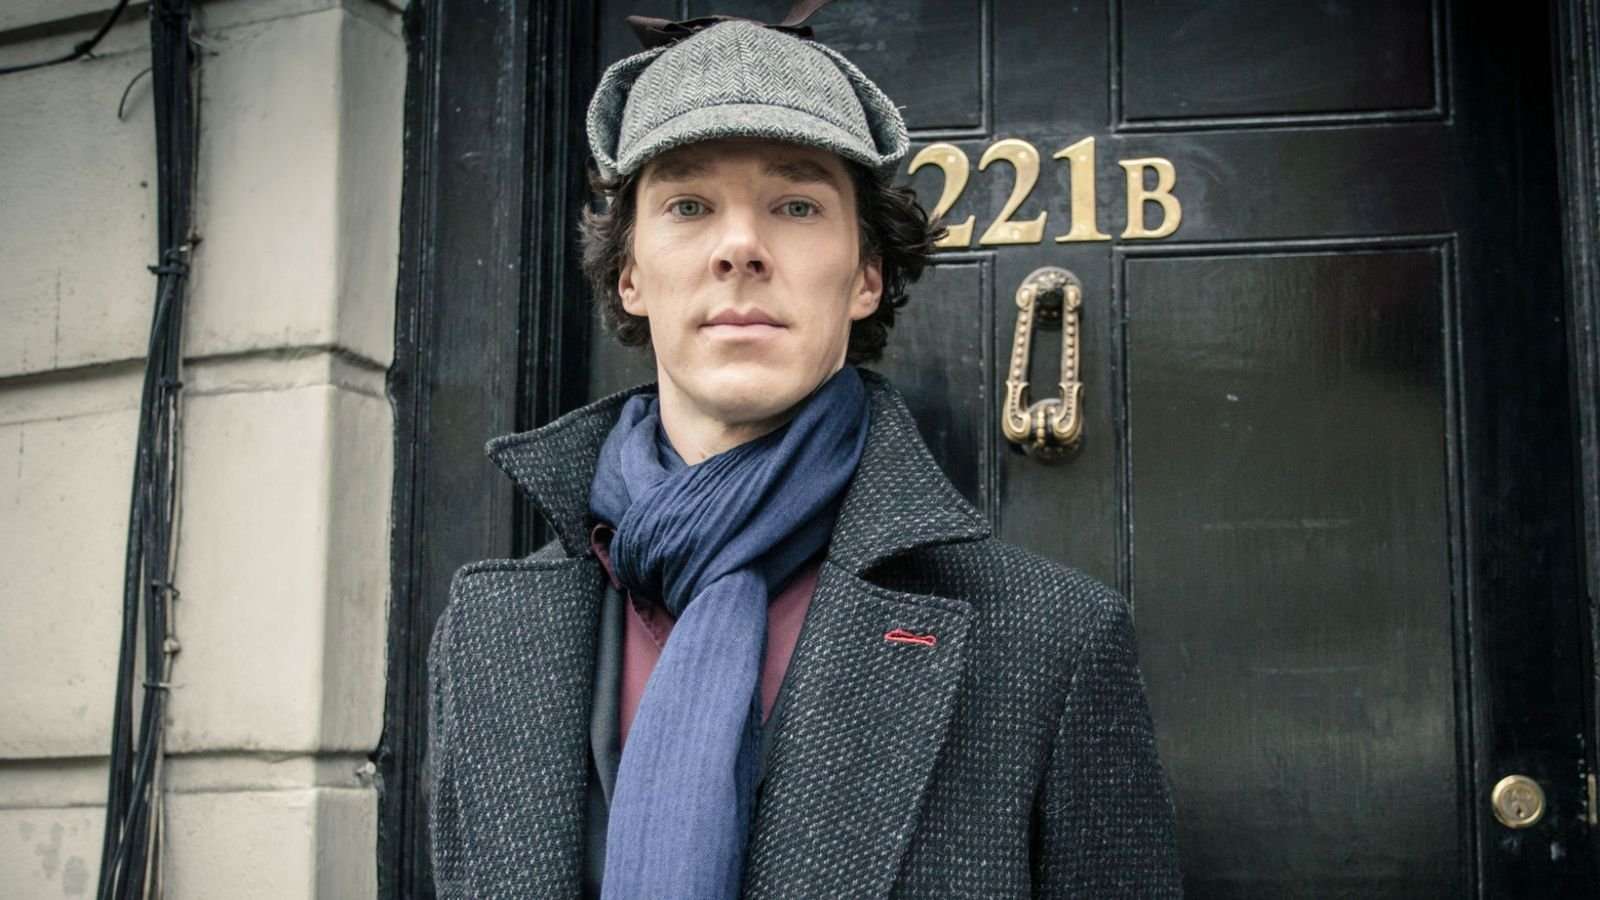 image for Sherlock star Benedict Cumberbatch 'saves cyclist who was being attacked'